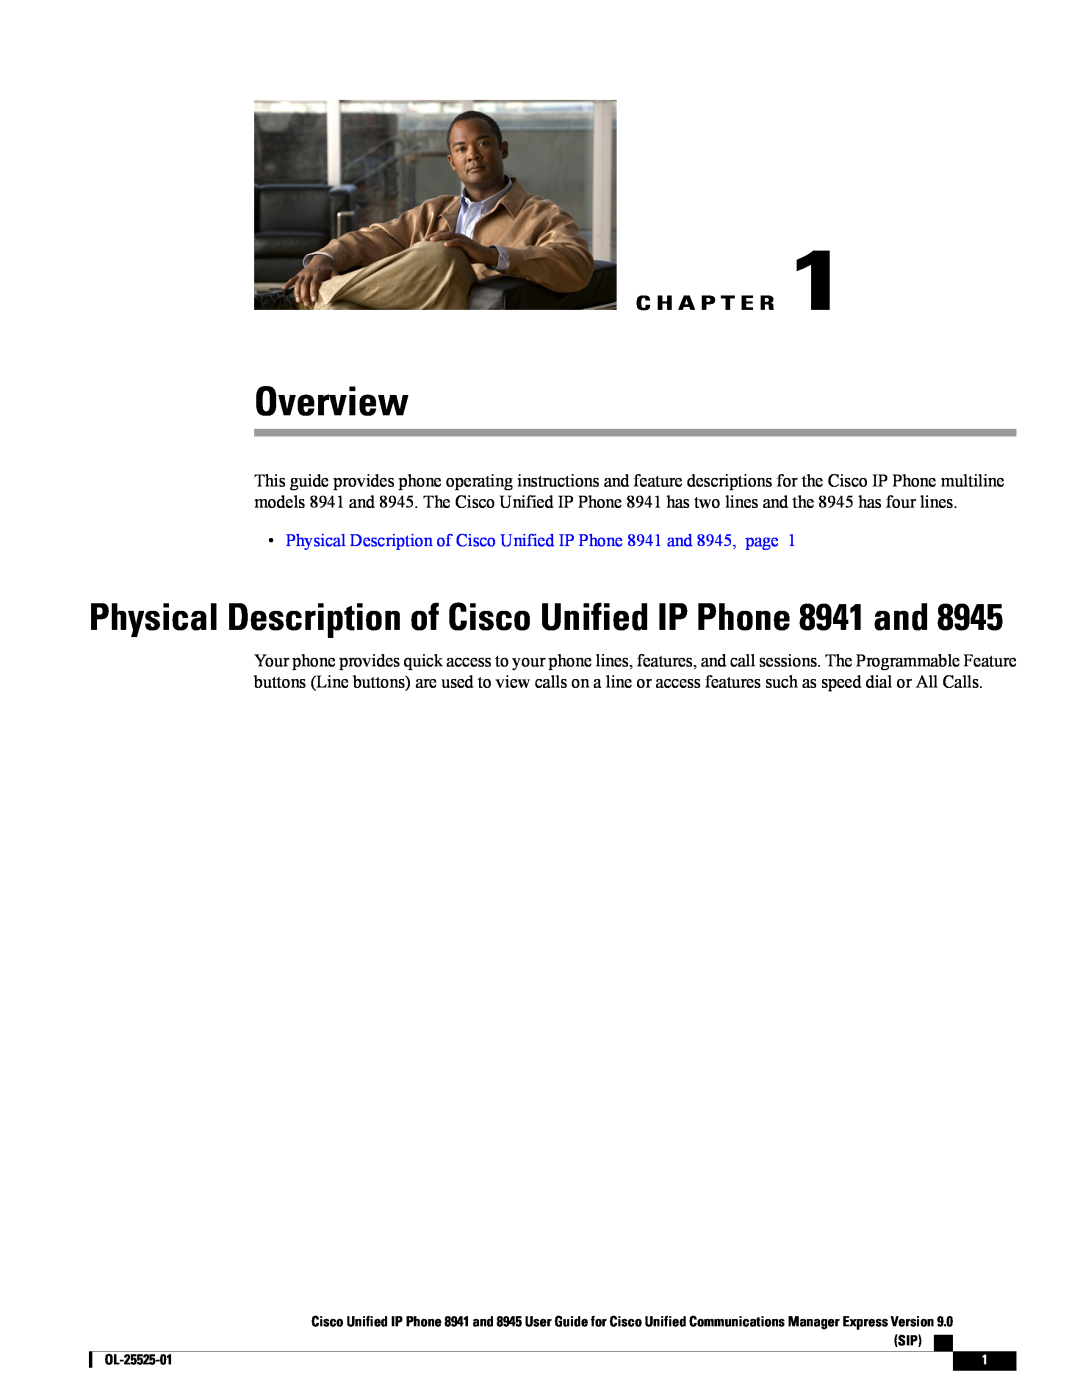 Cisco Systems 8945 manual Overview, C H A P T E R, Physical Description of Cisco Unified IP Phone 8941 and 